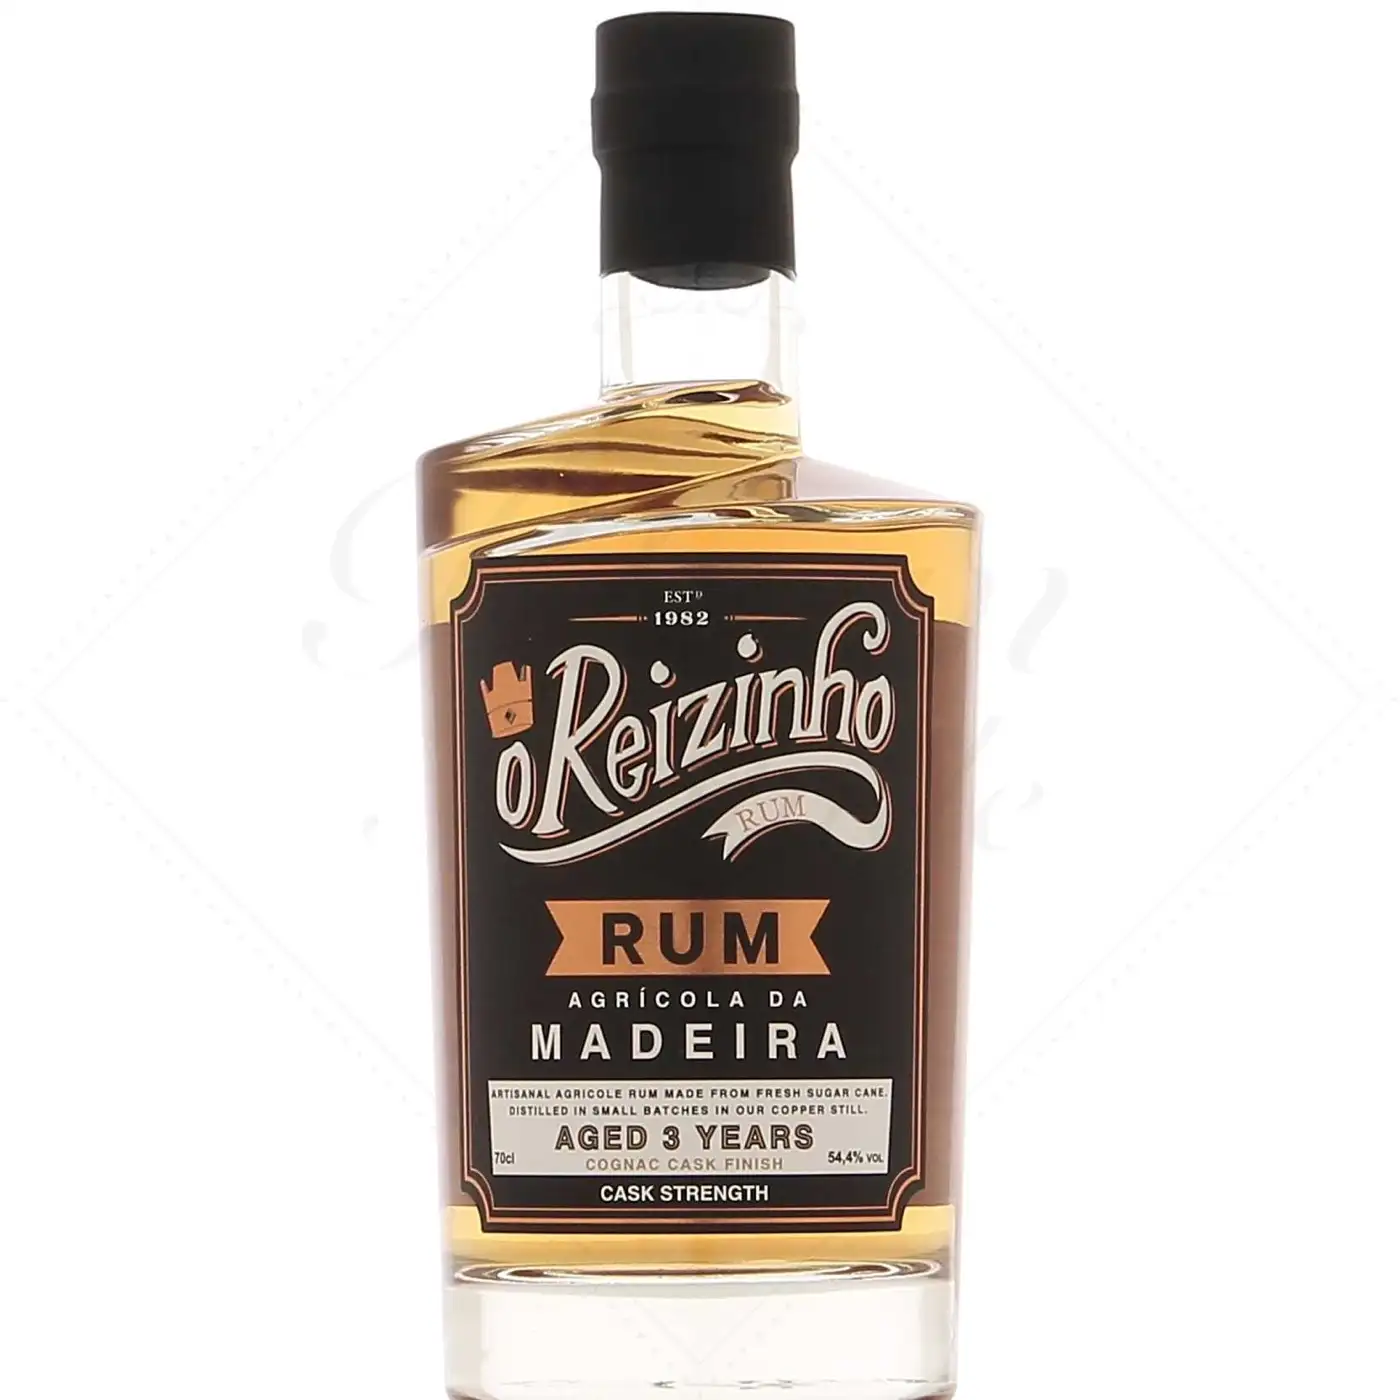 Image of the front of the bottle of the rum Aged 3 Years